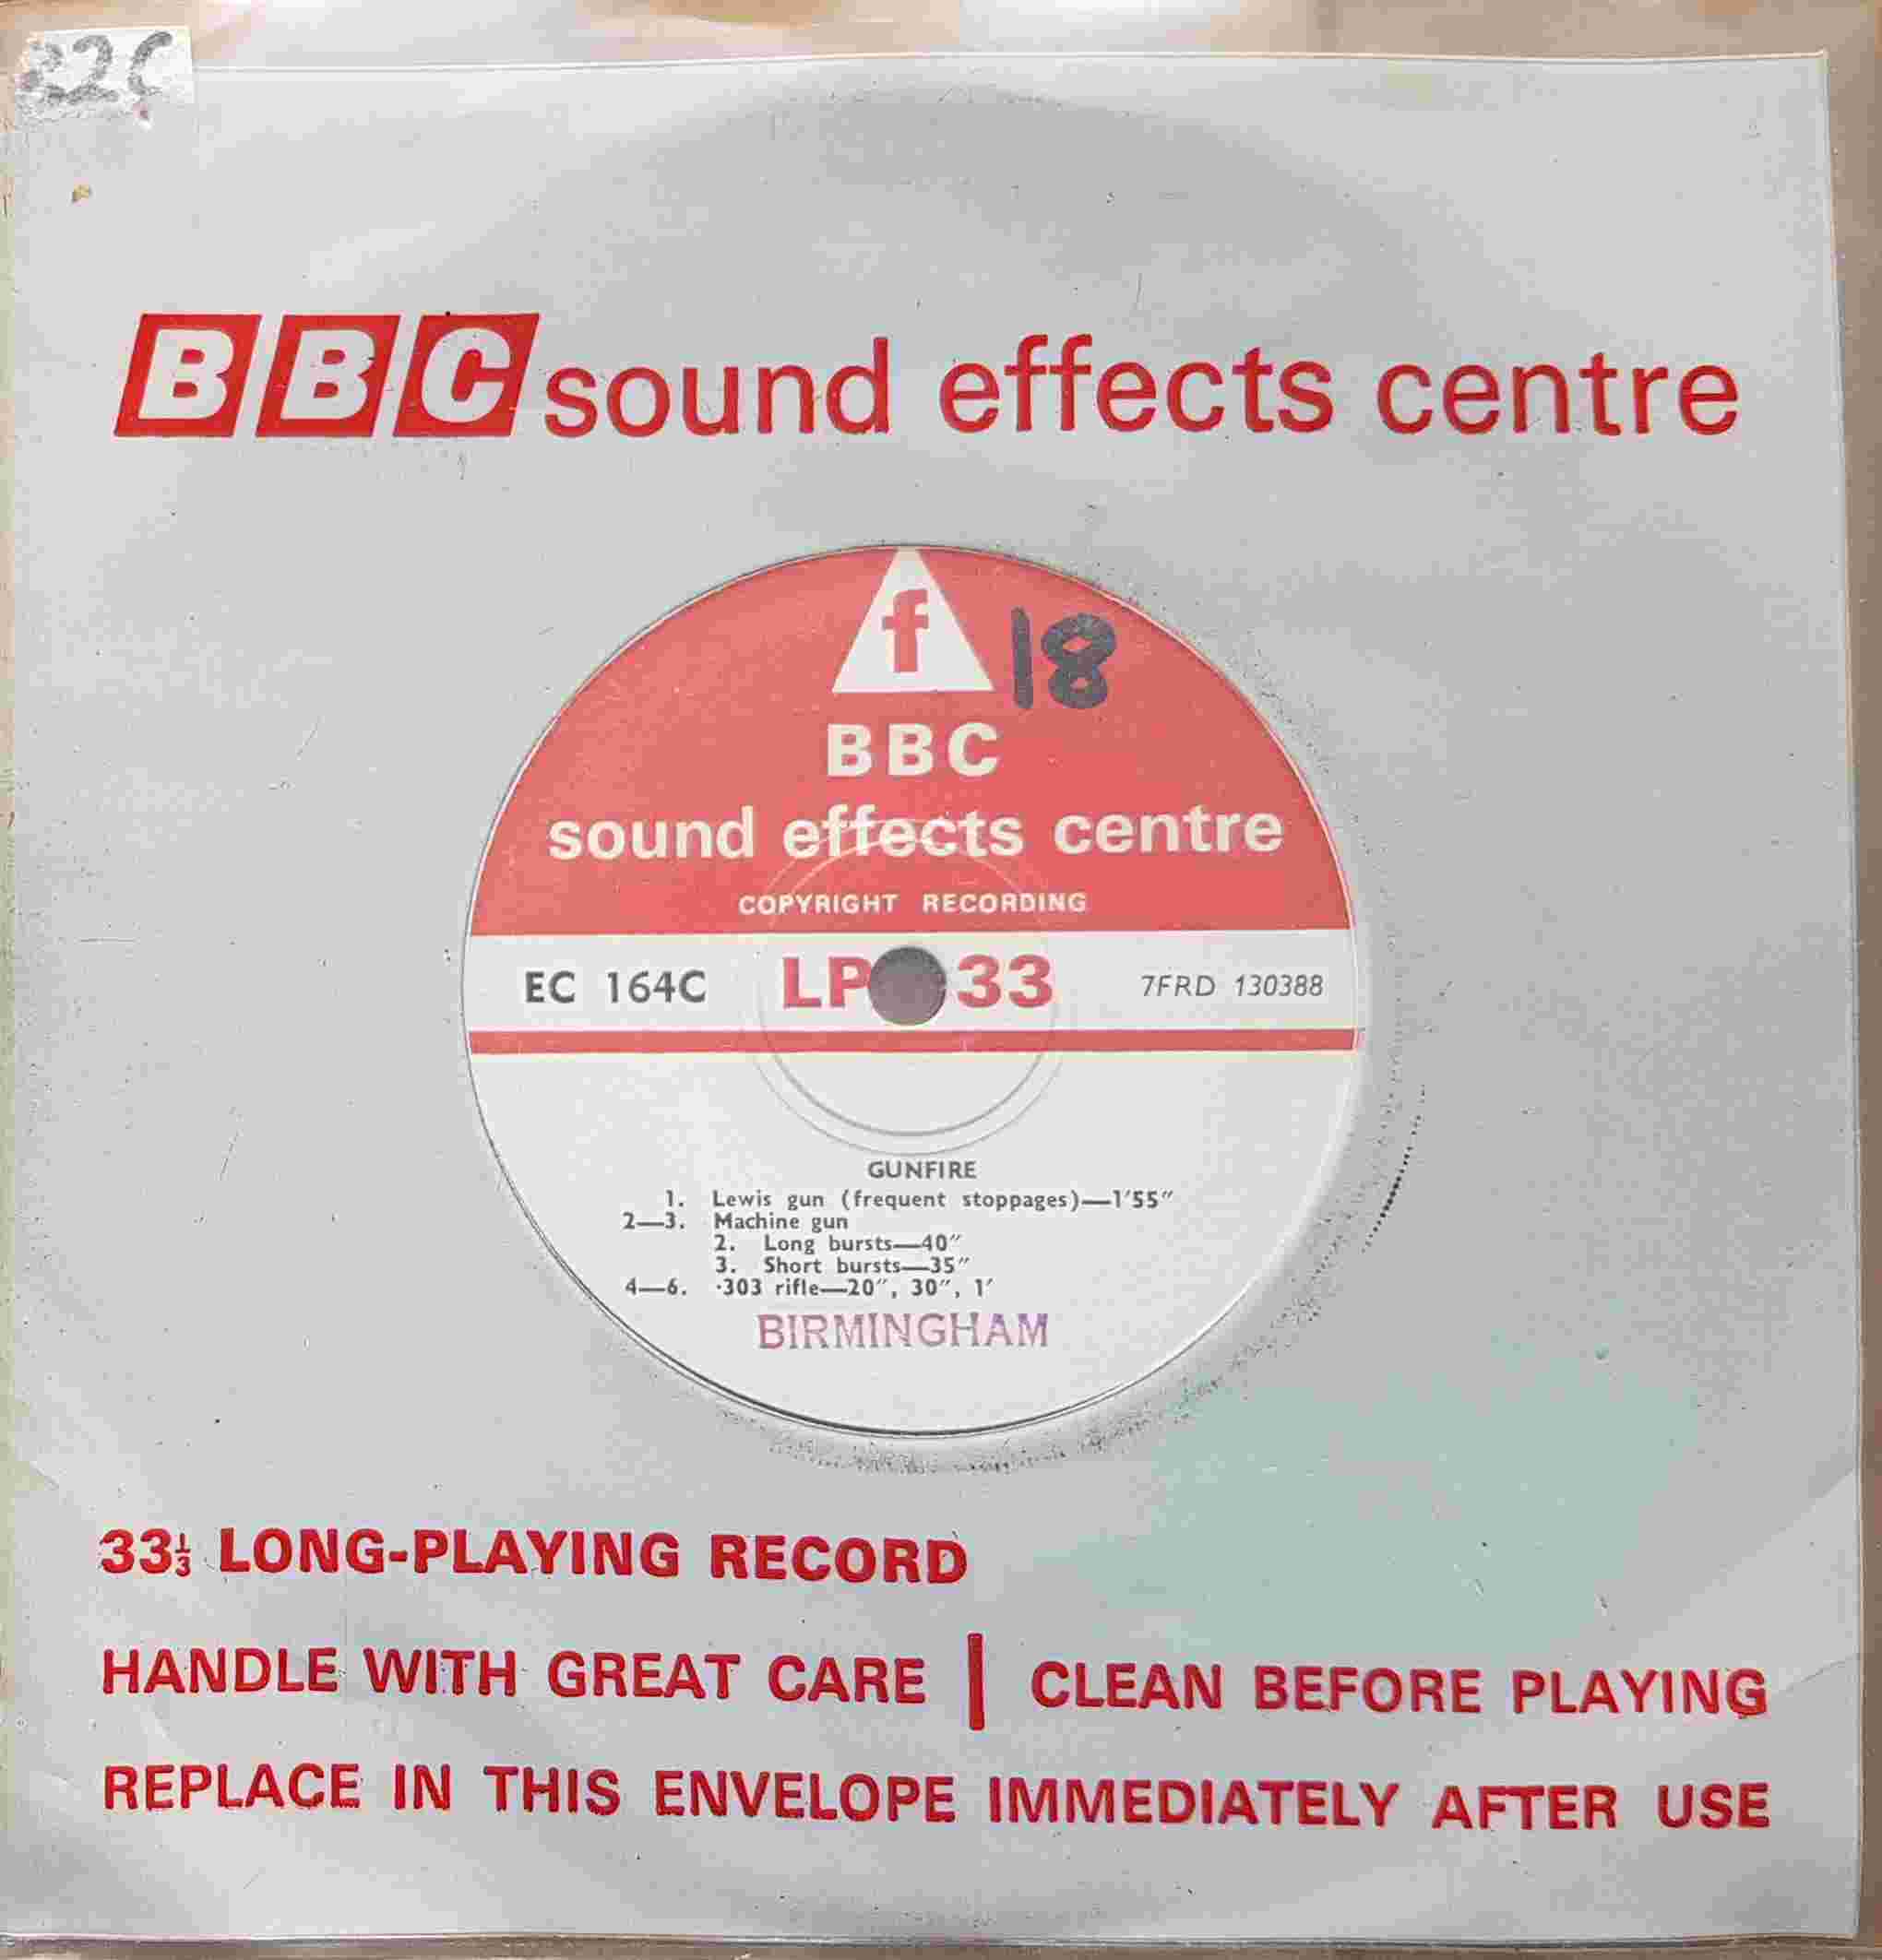 Picture of EC 164C Gunfire by artist Not registered from the BBC records and Tapes library